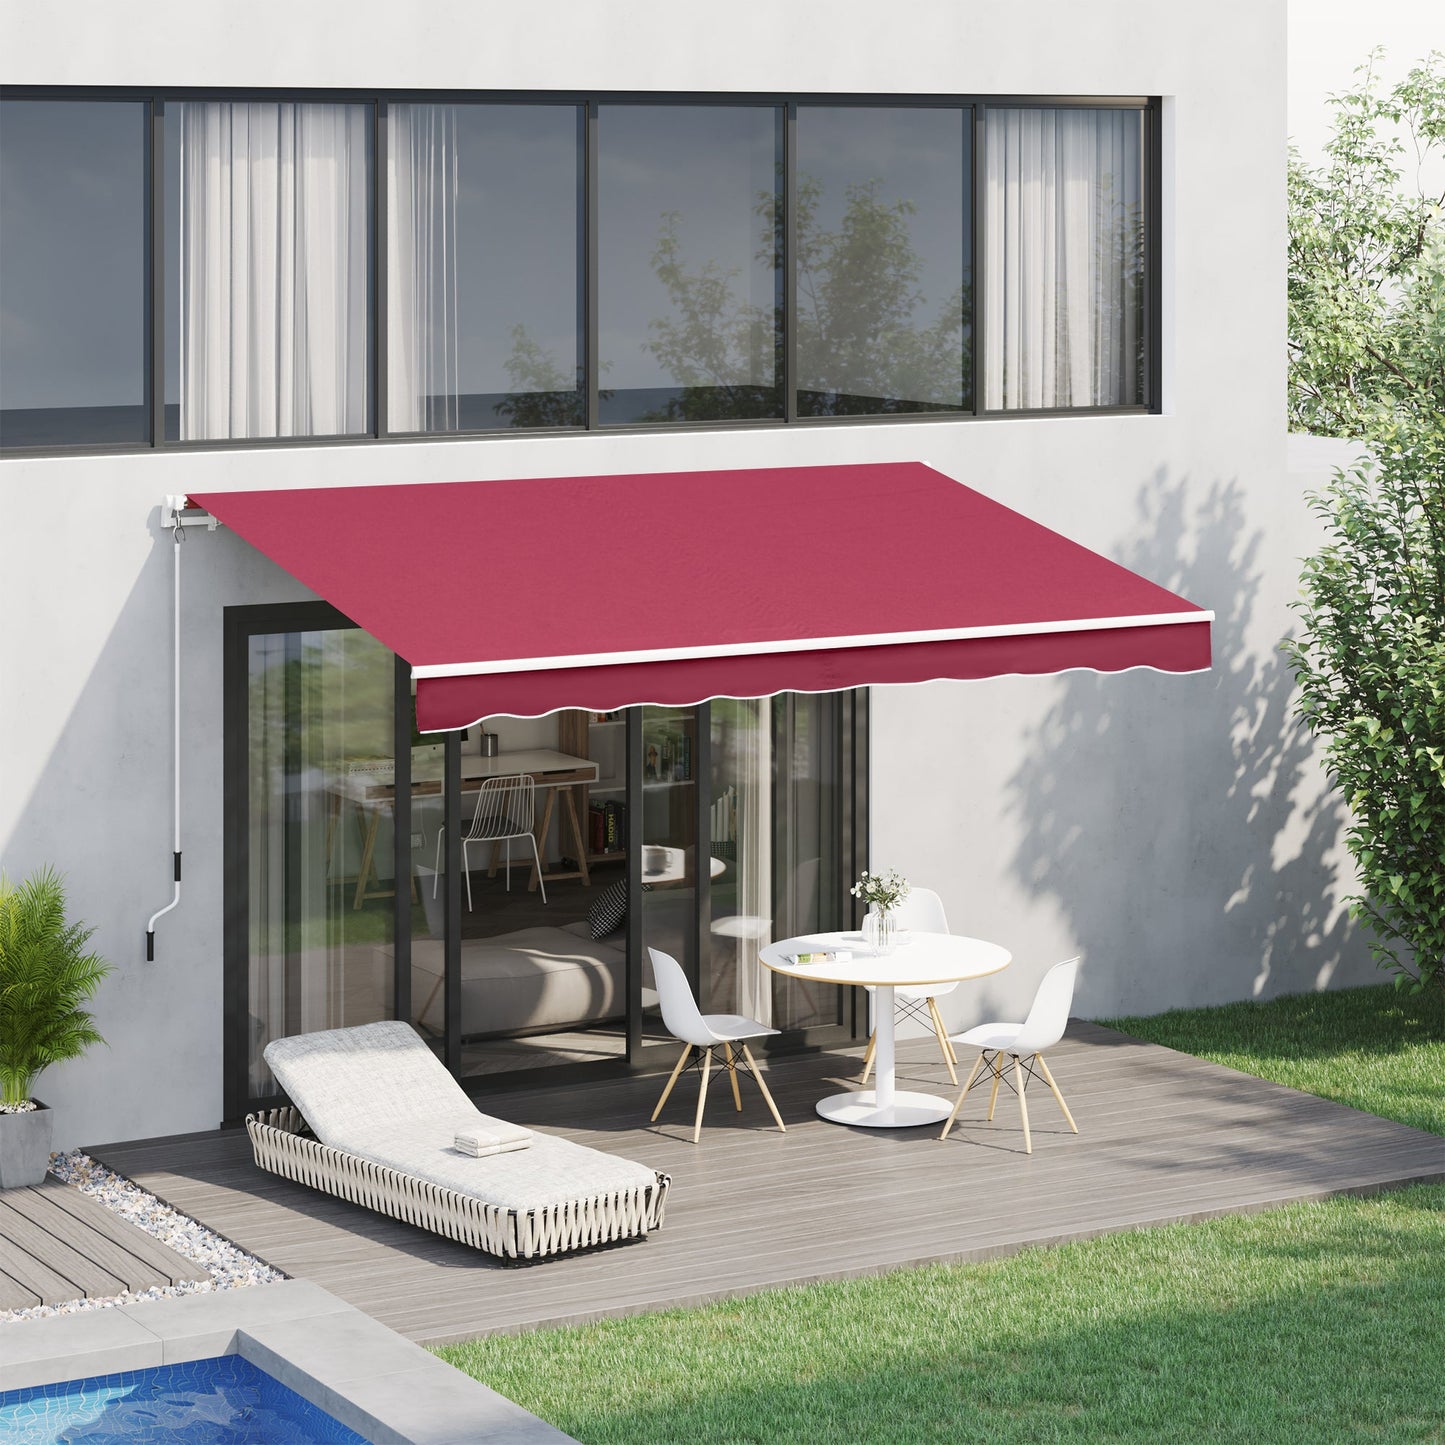 Outdoor and Garden-10' x 8' Manual Retractable Awning Sun Shade Shelter for Patio Deck Yard with UV Protection and Easy Crank Opening, Wine Red - Outdoor Style Company